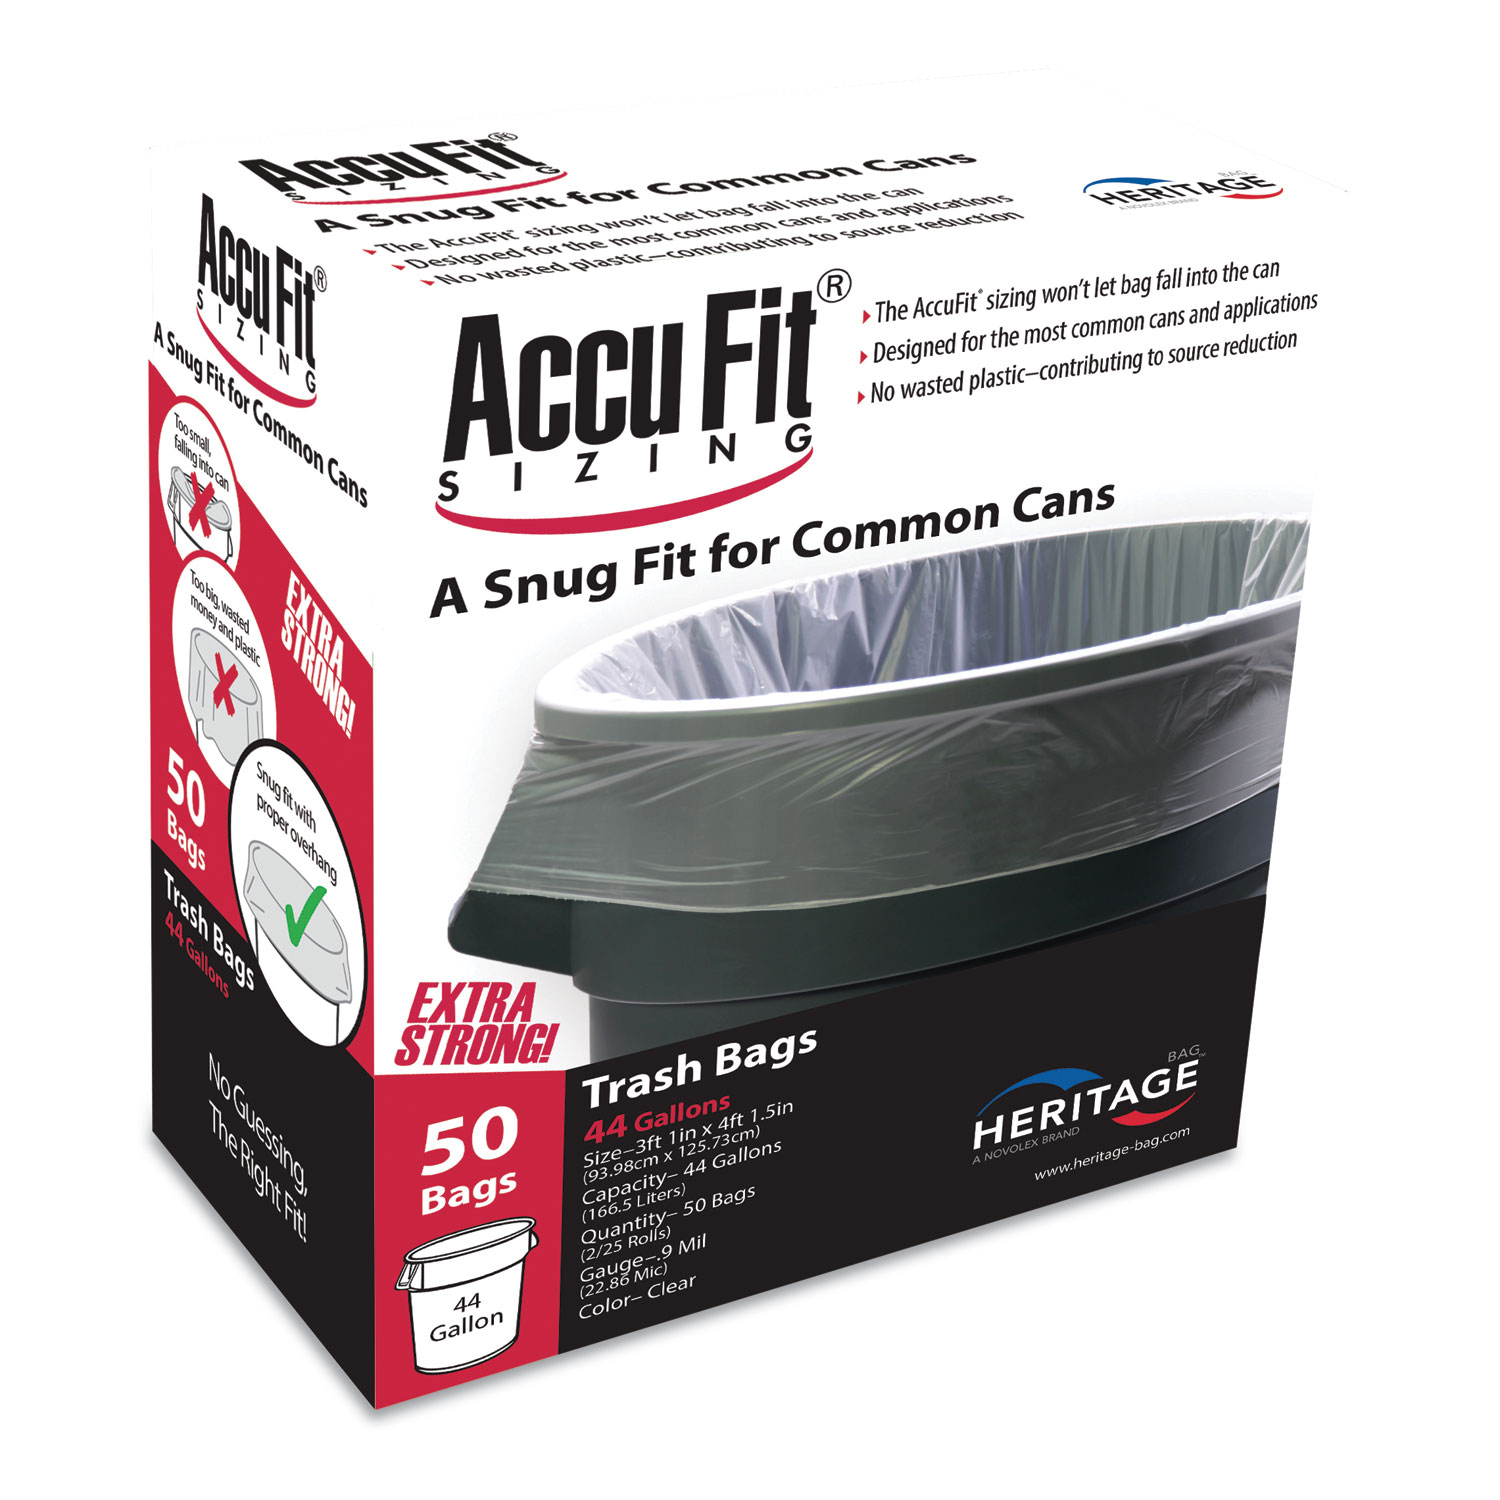  AccuFit H7450TC RC1 Linear Low Density Can Liners with AccuFit Sizing, 44 gal, 0.9 mil, 37 x 50, Clear, 50/Box (HERH7450TCRC1) 